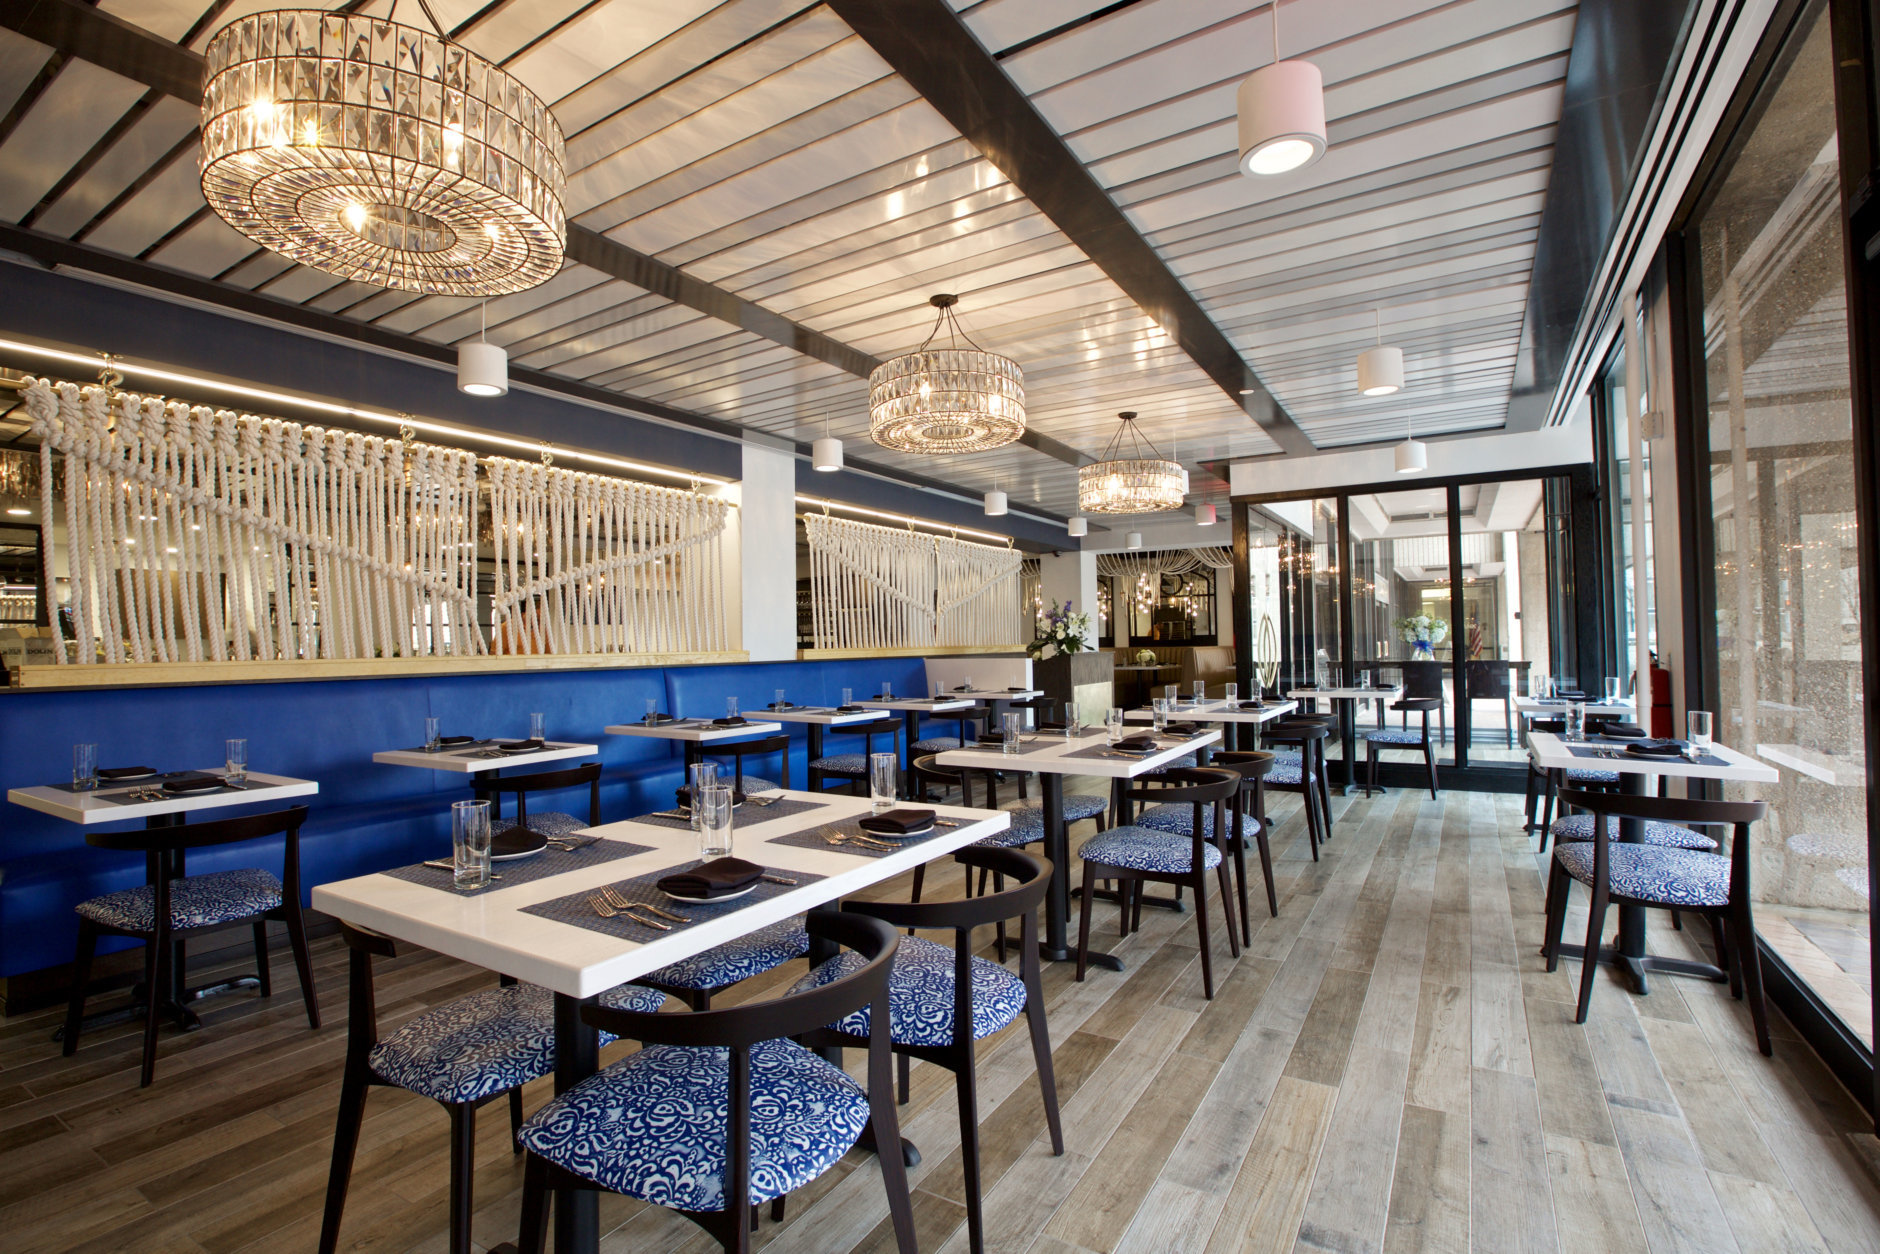 At All Set (8630 Fenton St., Silver Spring), Streetsense complemented the coastal New England cuisine with a contemporary nautical look. (Courtesy Streetsense/Wayne E. Chinnock)